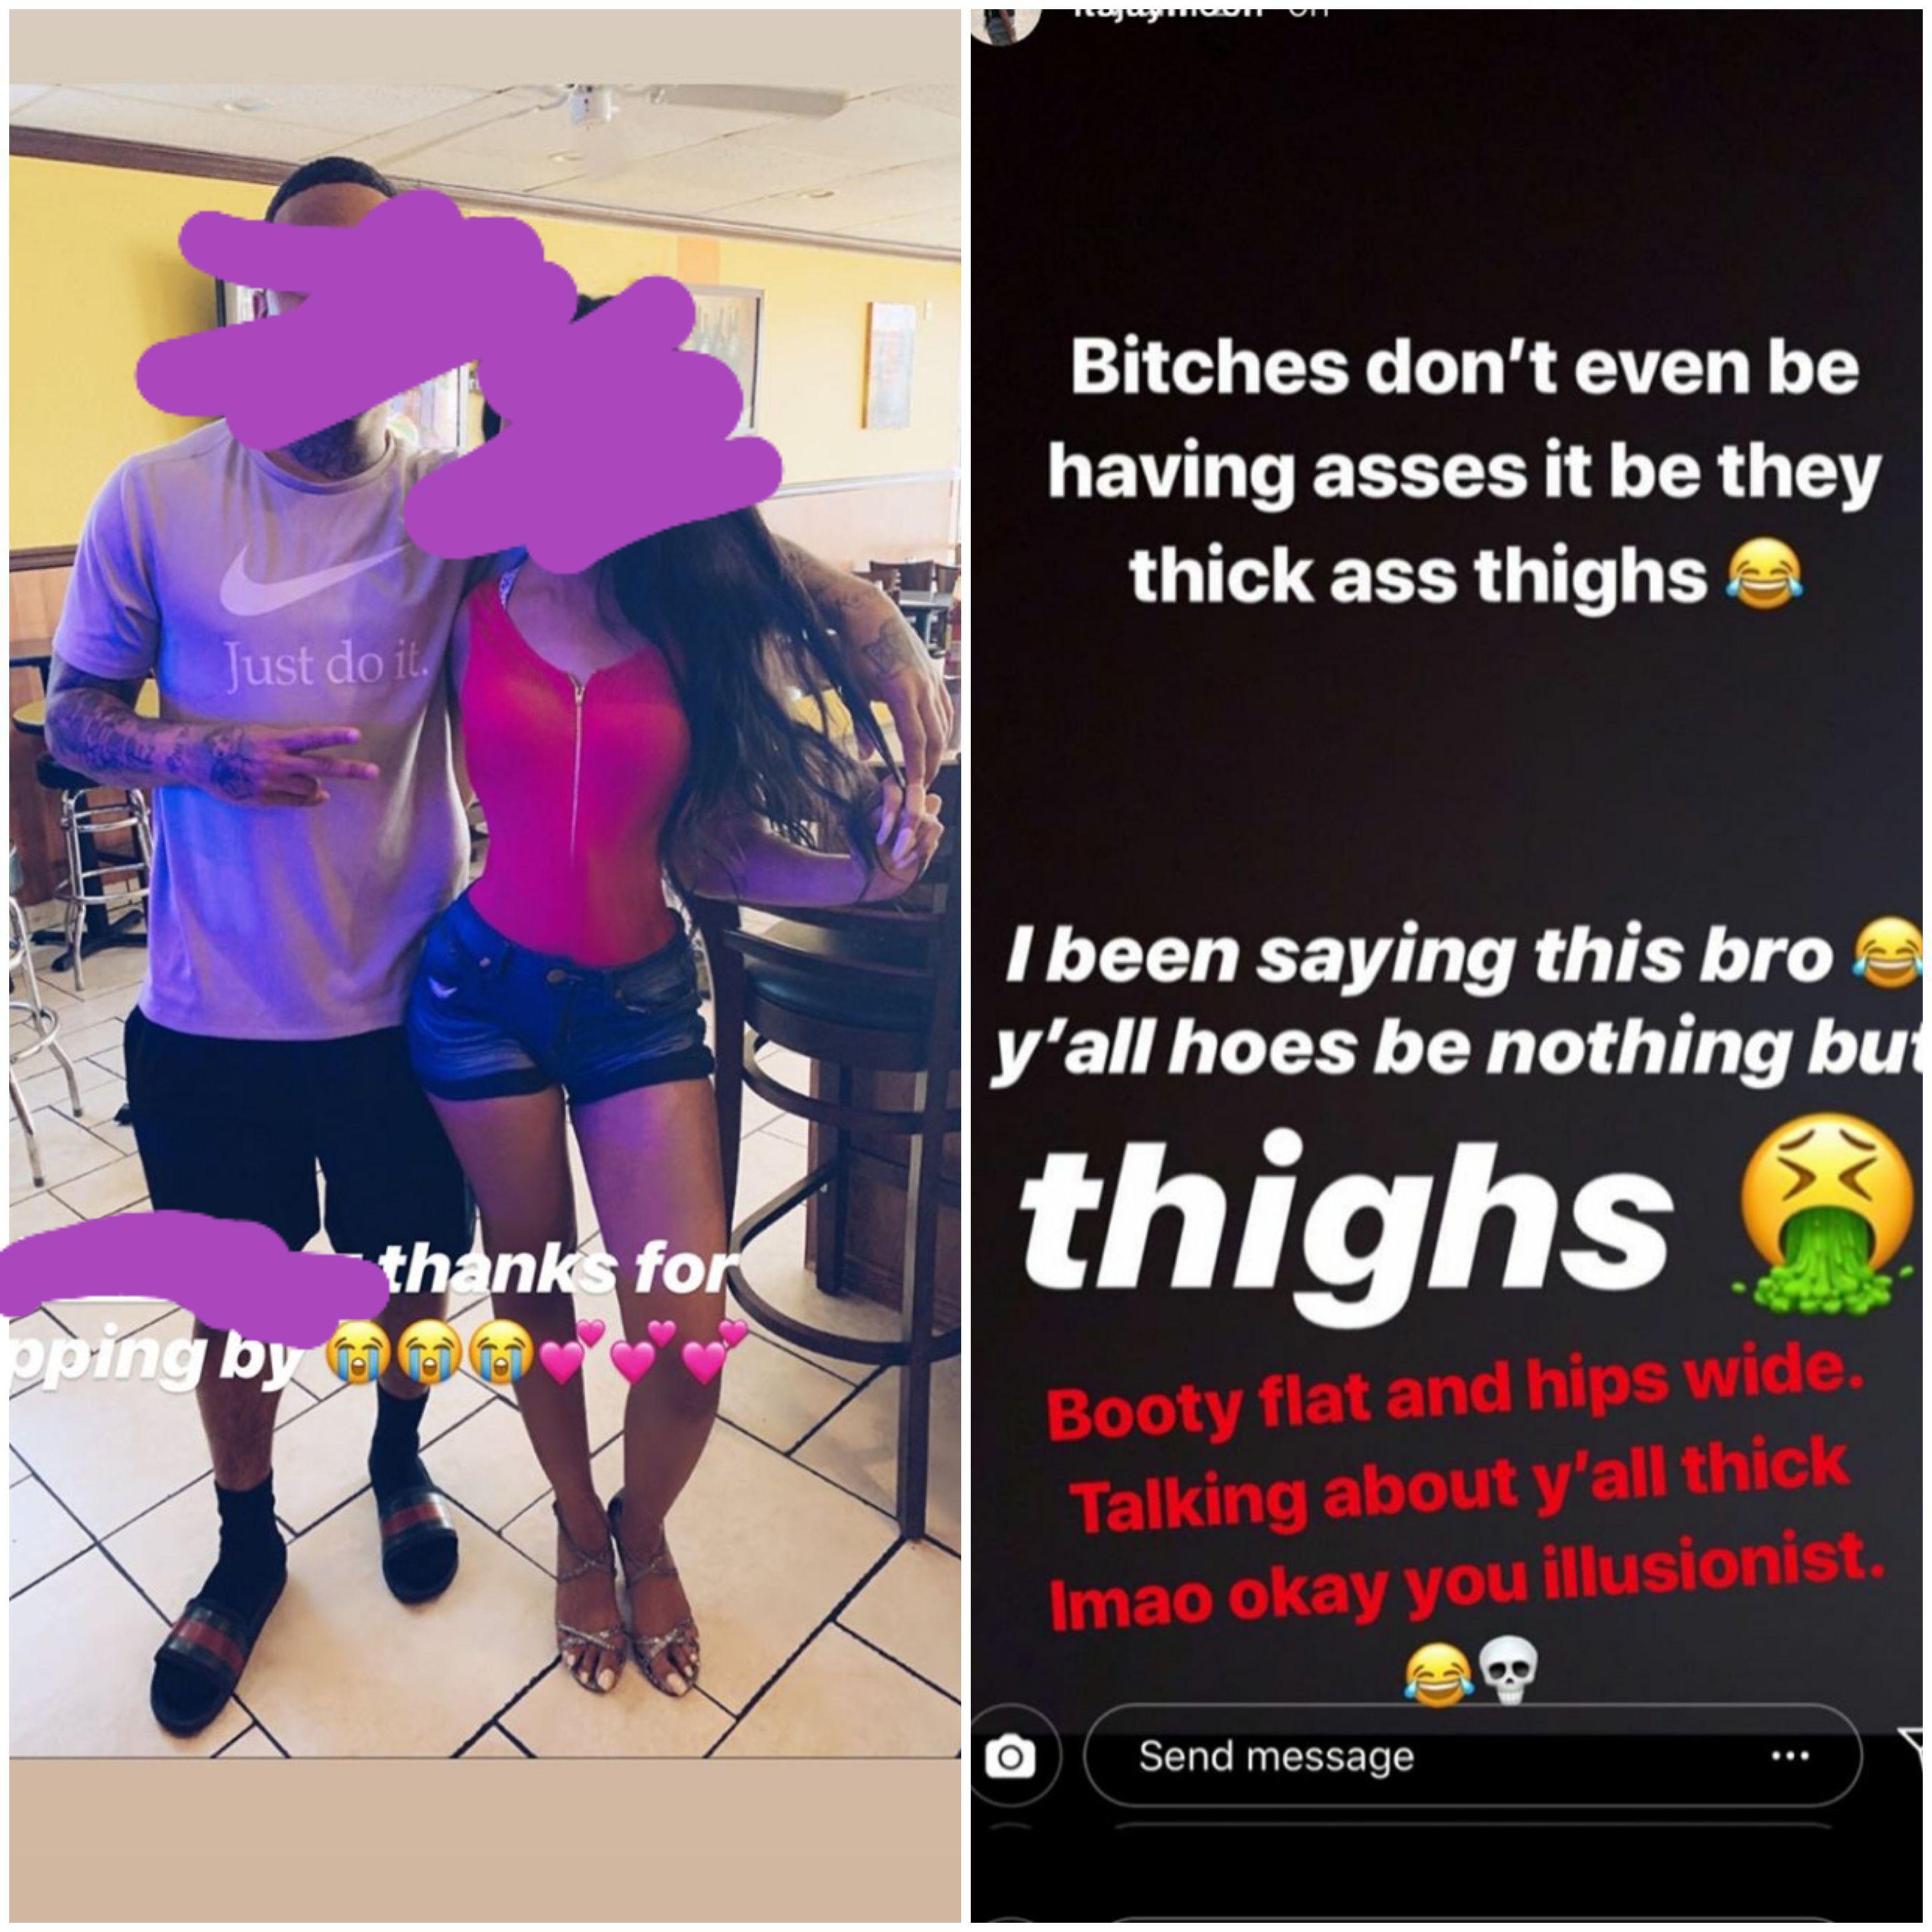 Bitches don't even be having asses it be they thick ass thighs Just do it I been saying this bro y'all hoes be nothing bu thighs thanks for poing by Booty flat and hips wide. Talking about y'all thick Imao okay you illusionist.